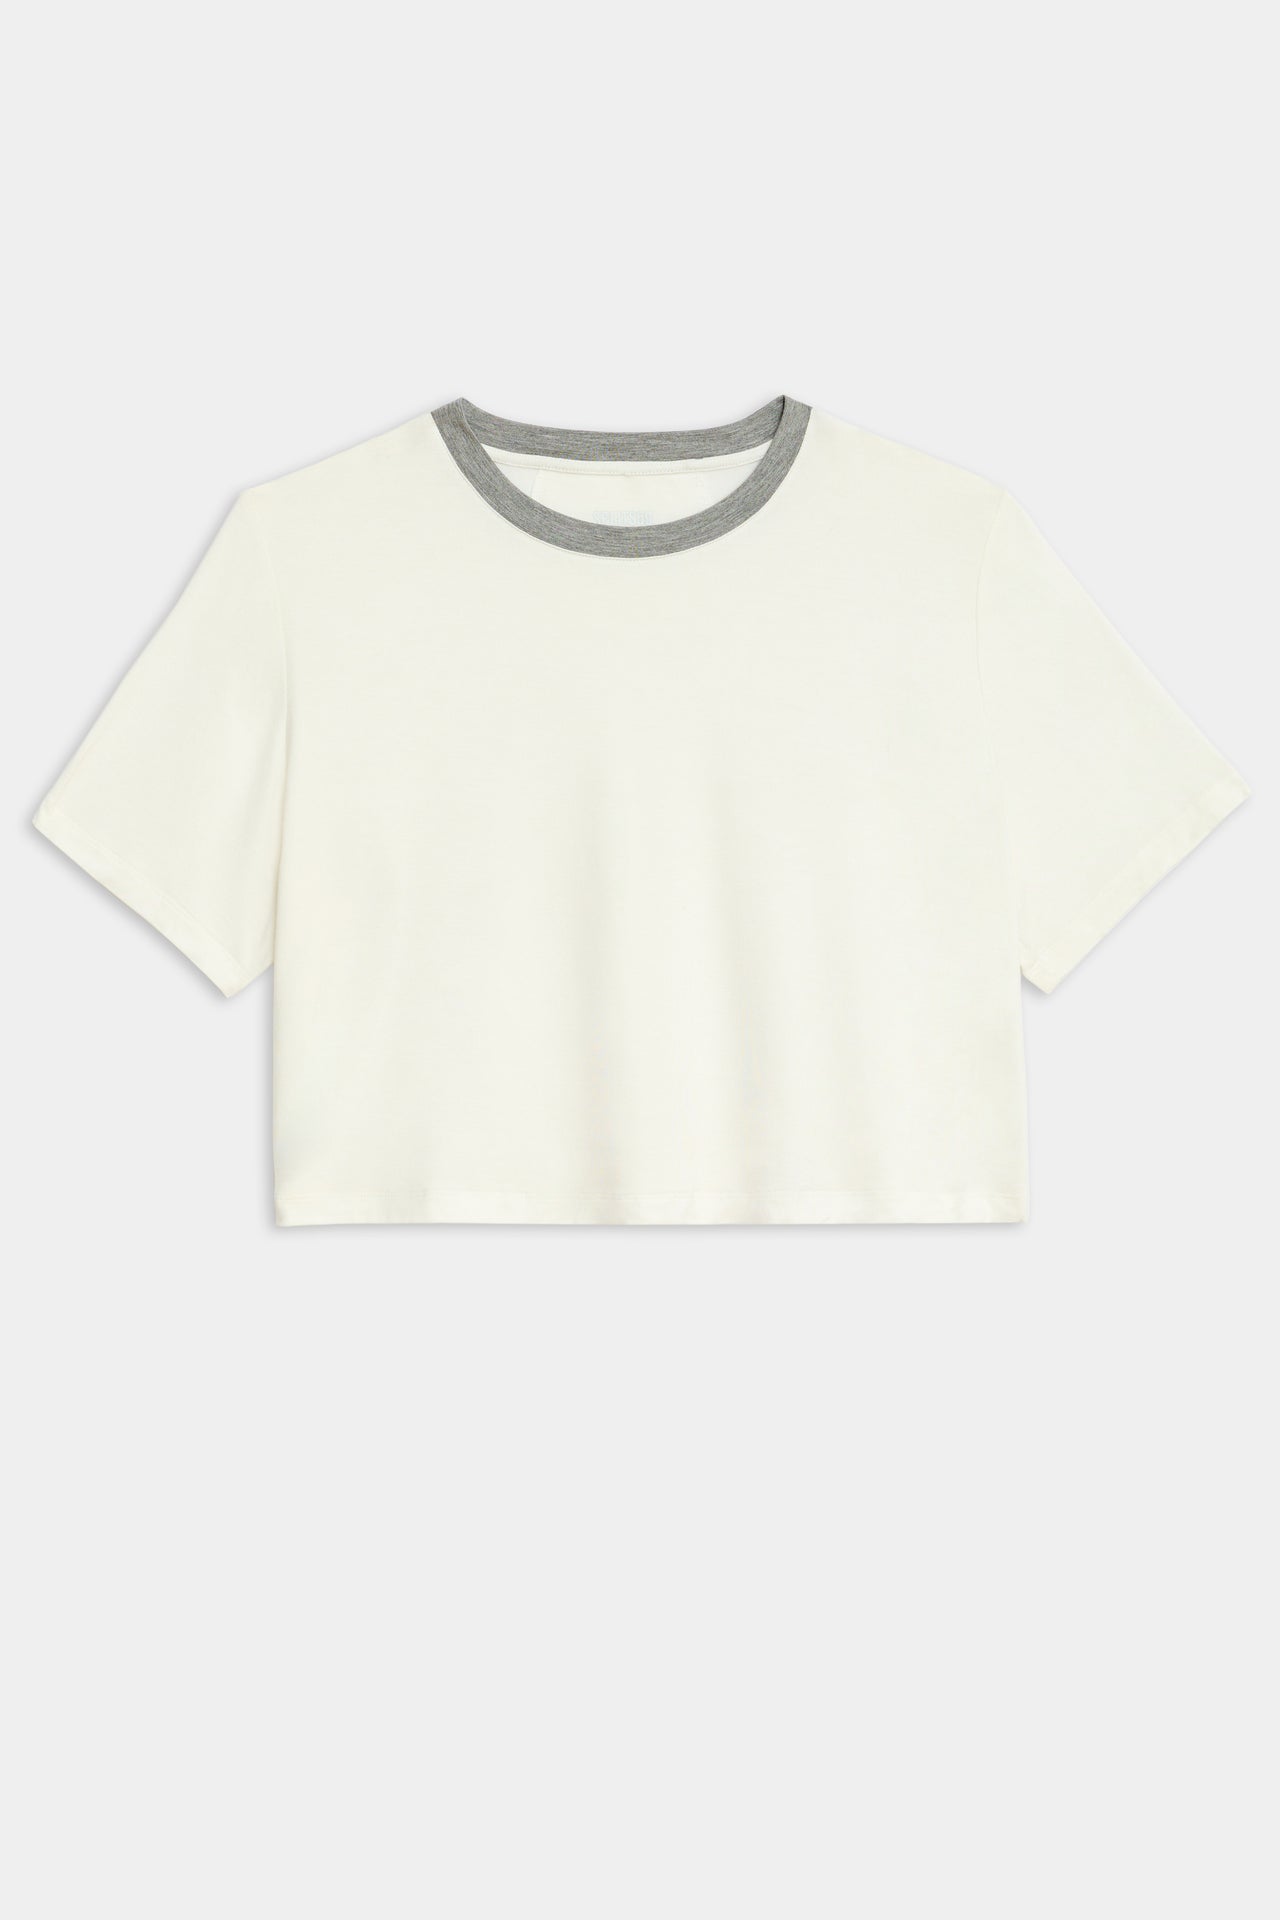 Flat view of white cropped short sleeve t-shirt with thin light grey neck hem 